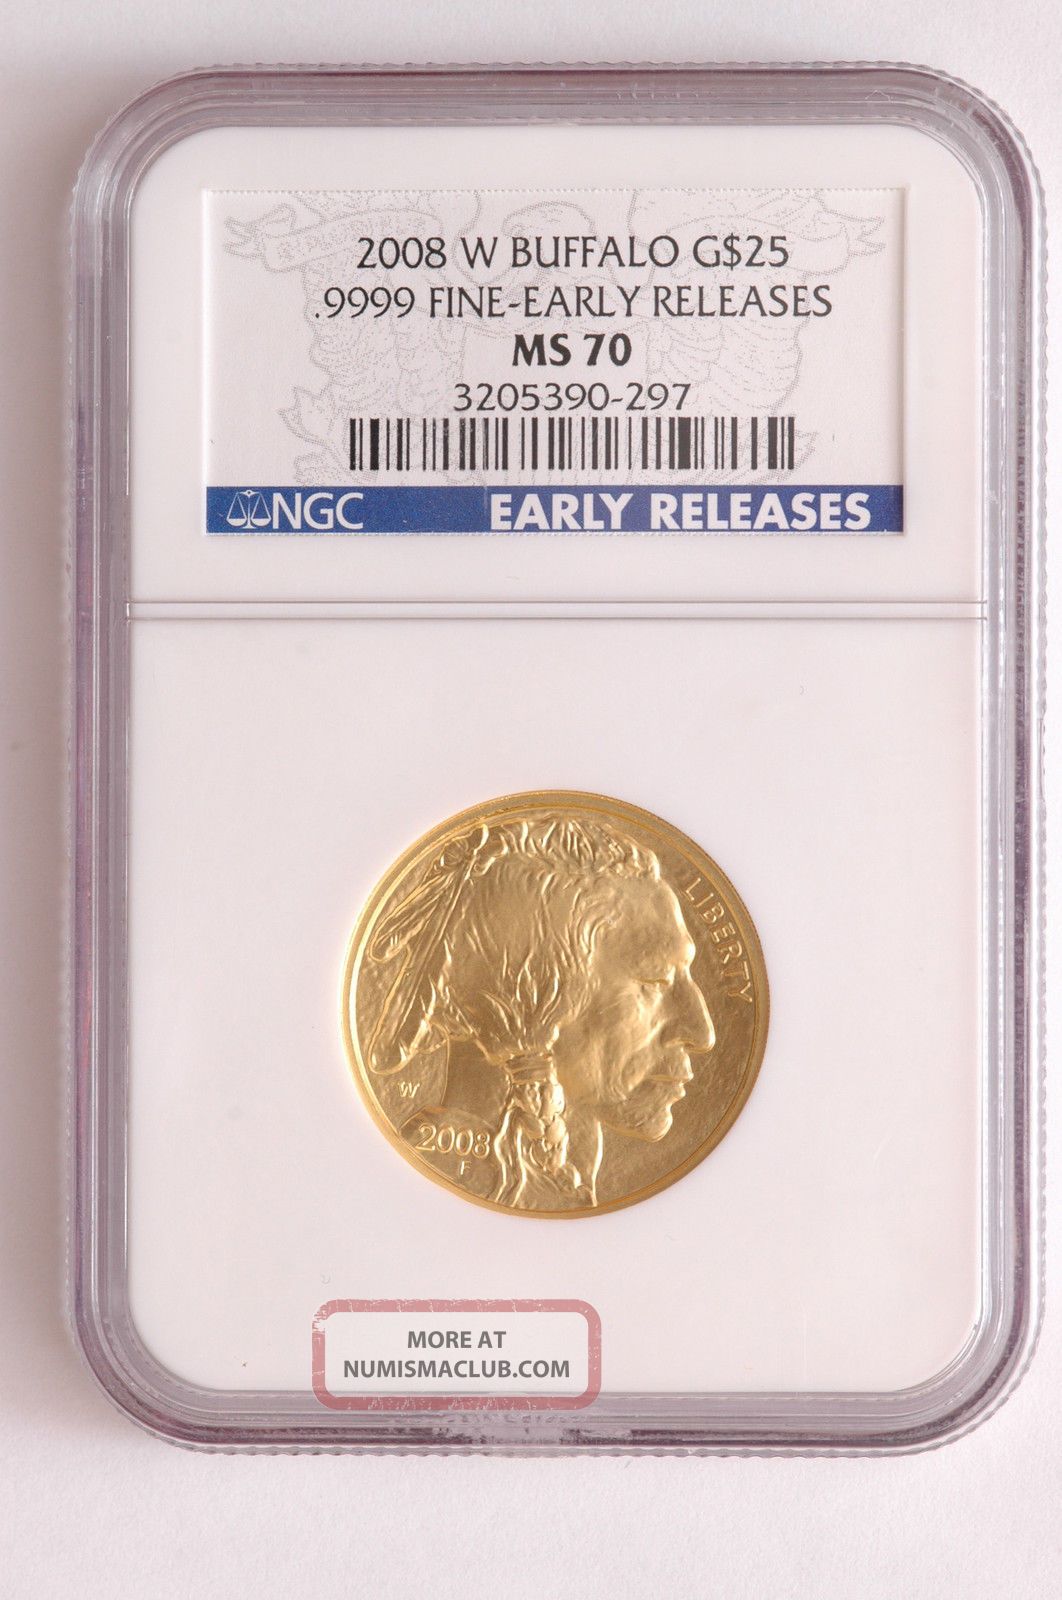 2008 W Buffalo Gold $25, Early Release, Ngc Ms70